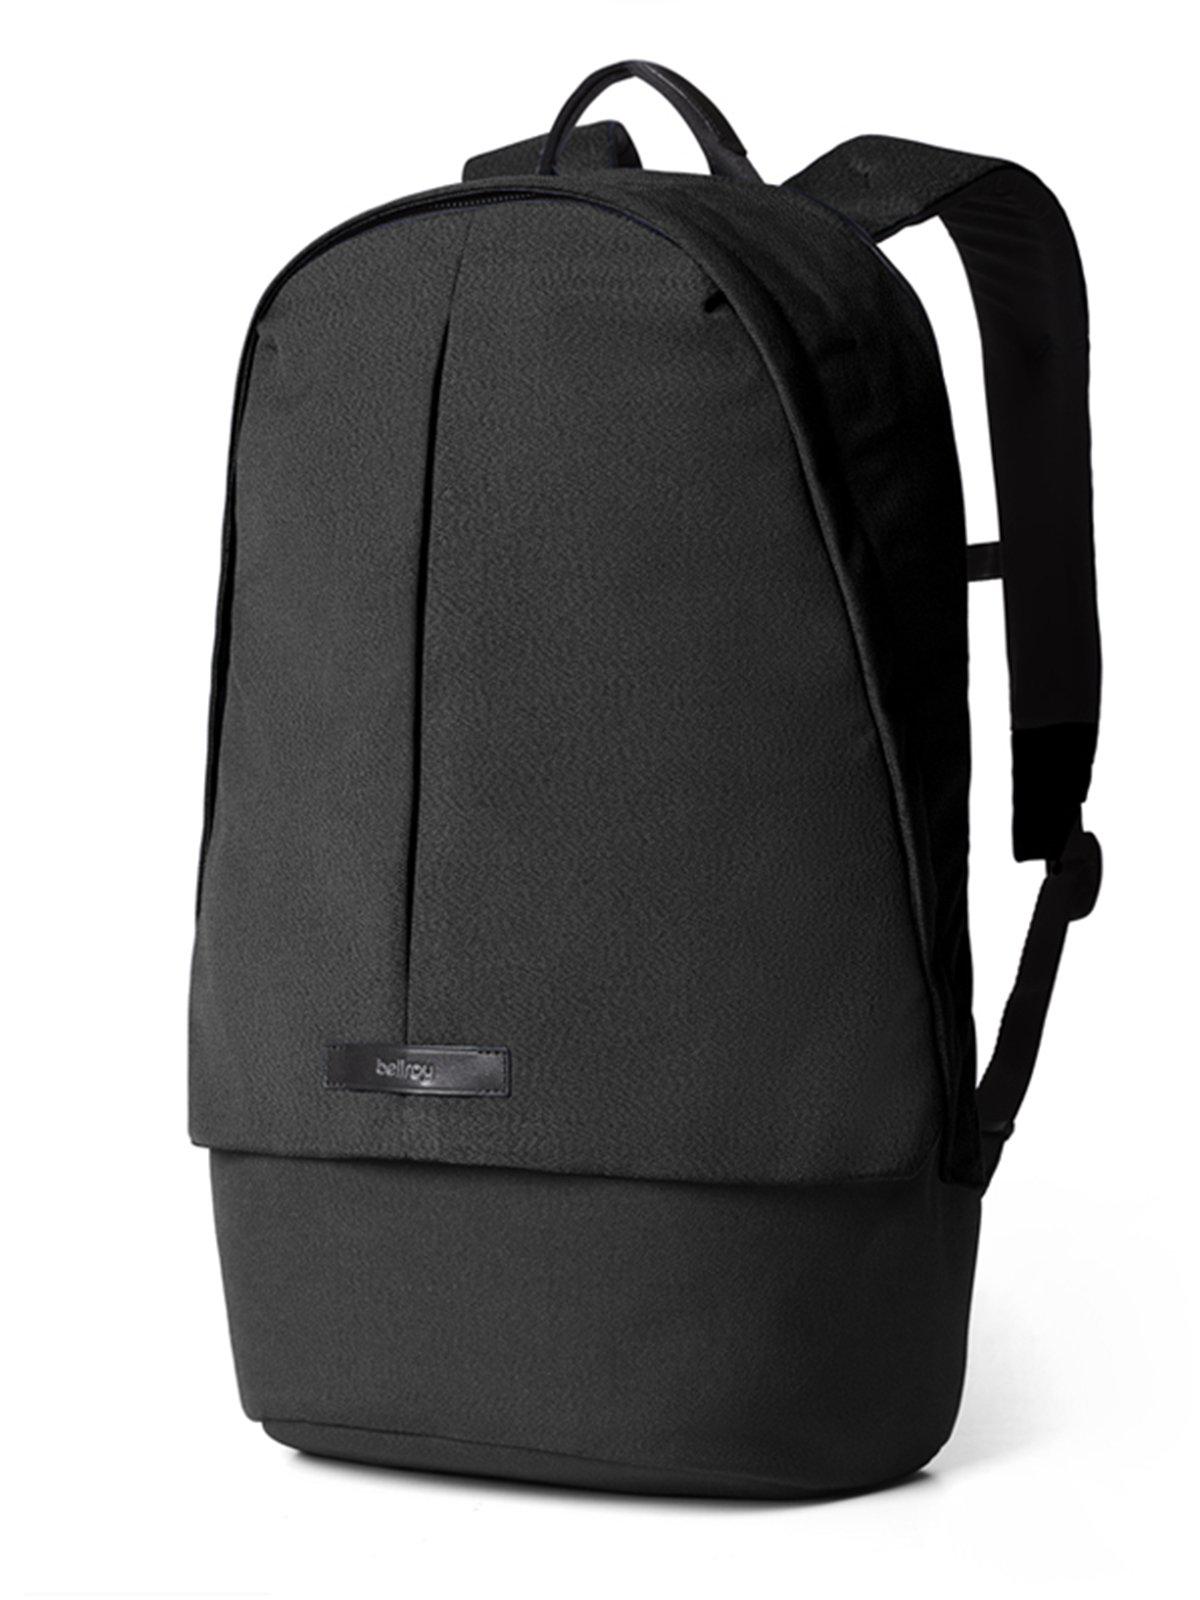 Bellroy Classic Backpack Plus Black - MORE by Morello Indonesia